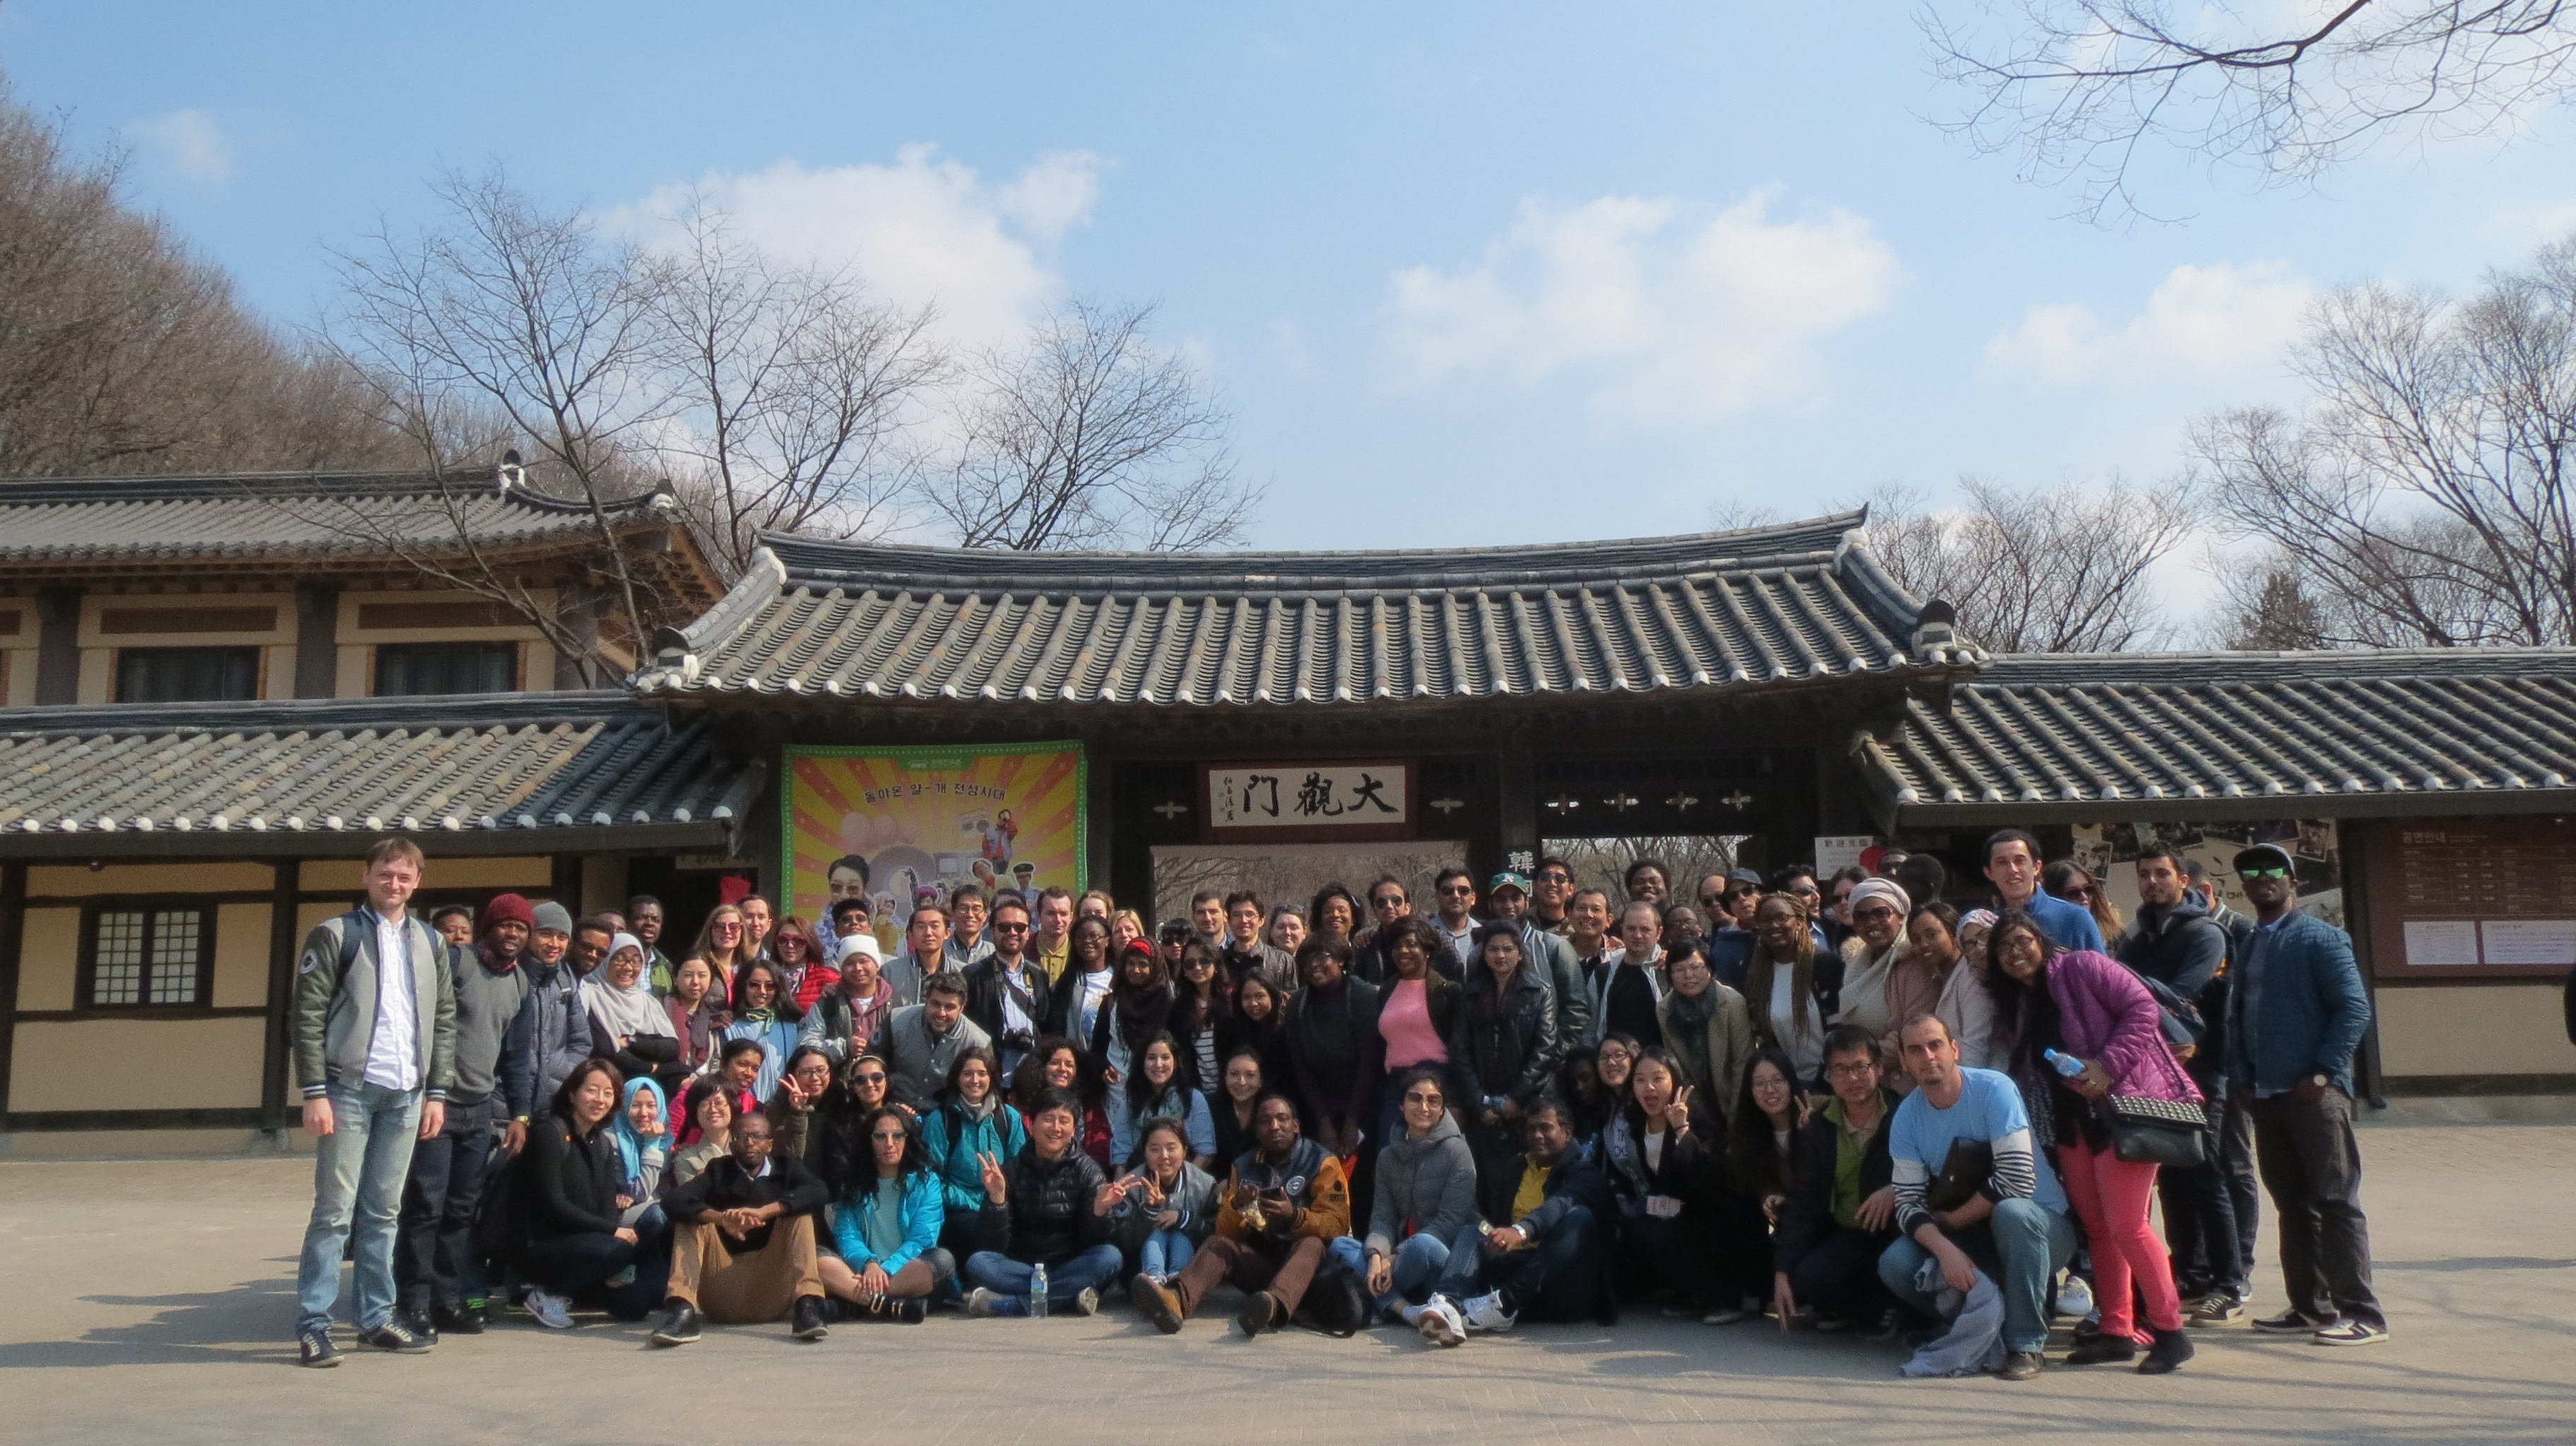 A day out at the Korean Folk Village